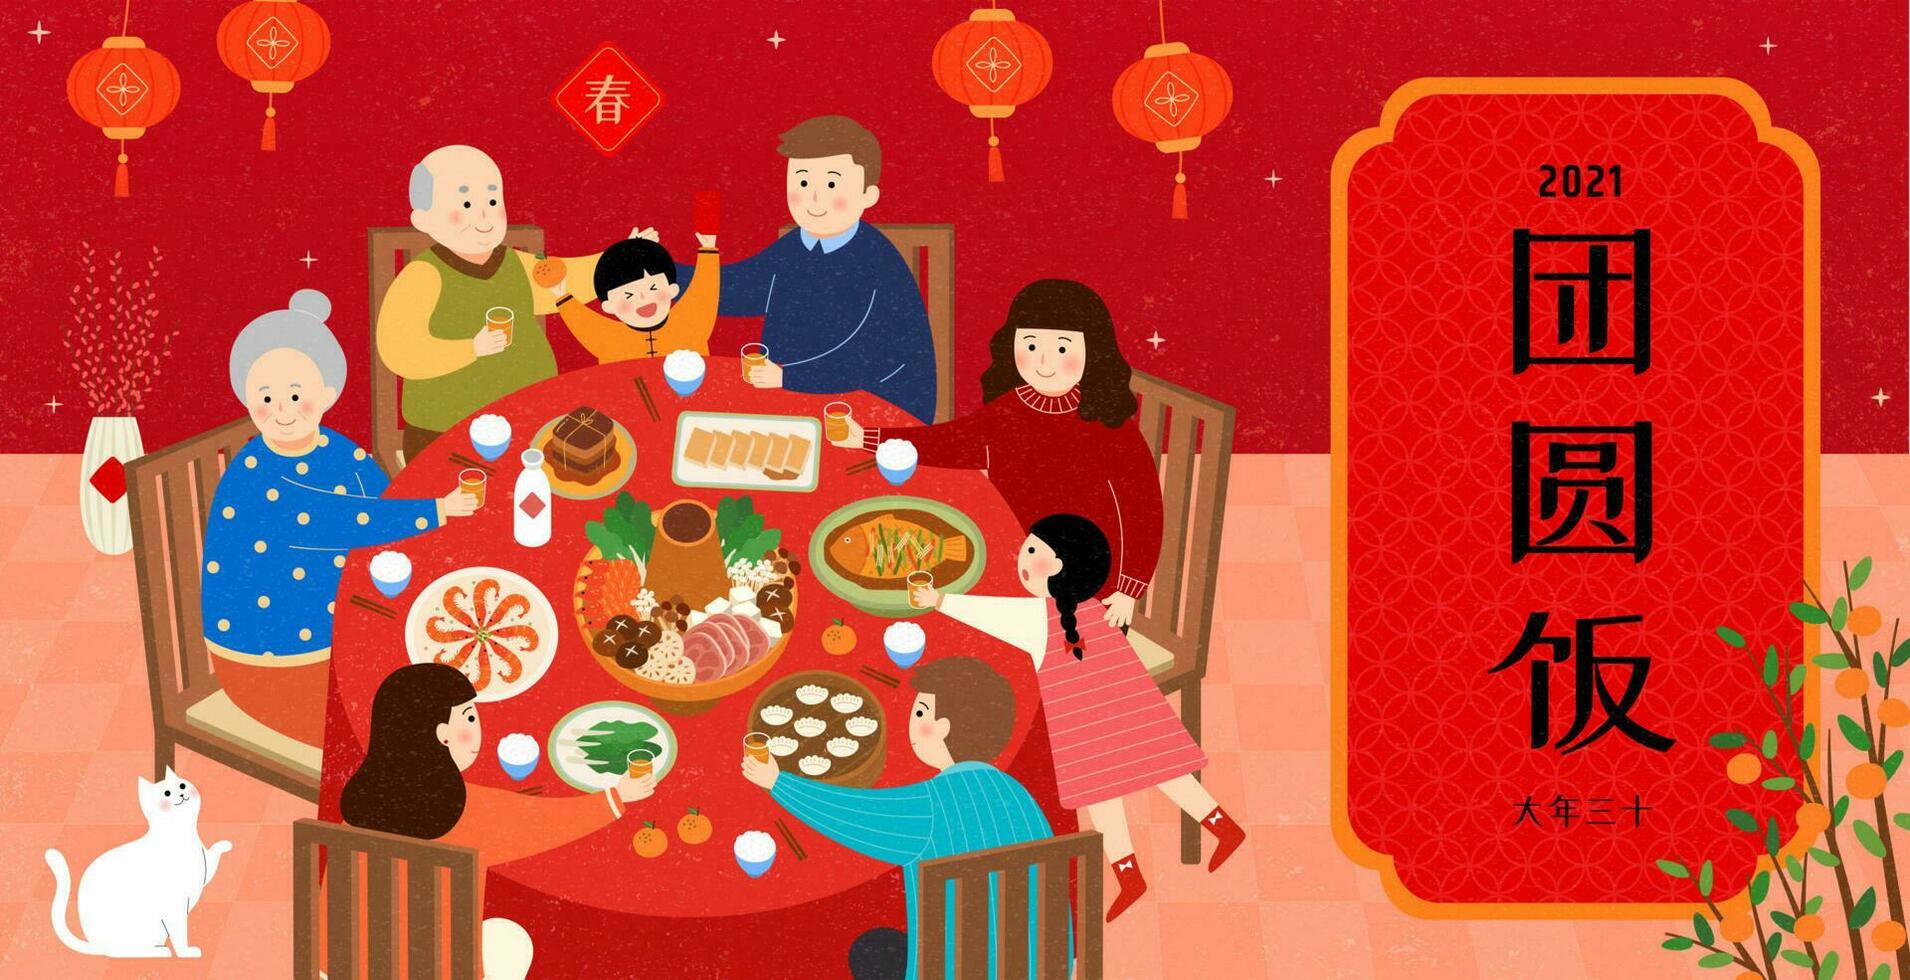 Whole Family Gather For The Reunion Dinner In Chinese New Years Eve Sitting By The Table With Plentiful Dishes Designed In Cute Style With Lantern Background Chinese Translation Reunion Dinner Vector 